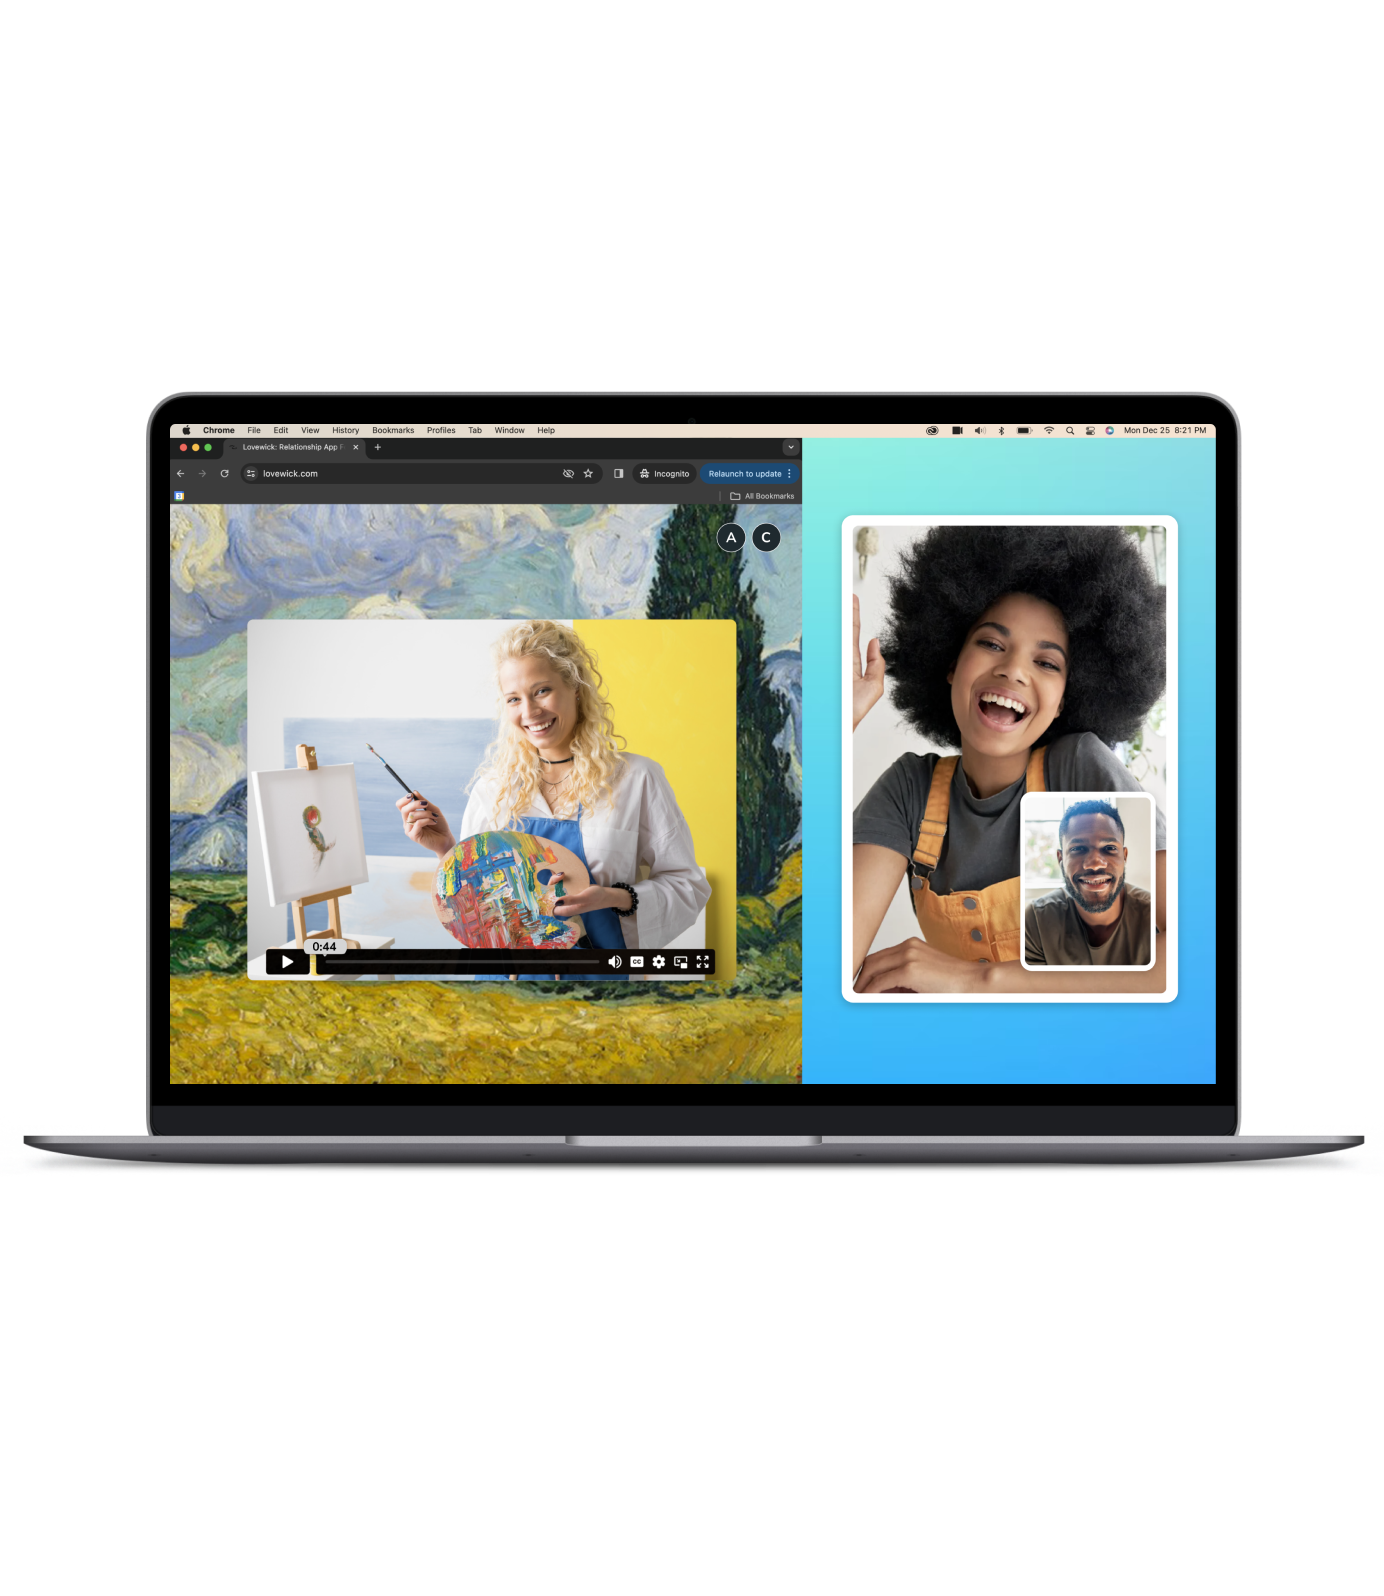 Lovewick brings long distance date ideas to life through private video call rooms with on-demand media player on one side and video chat screens for both partners on the other